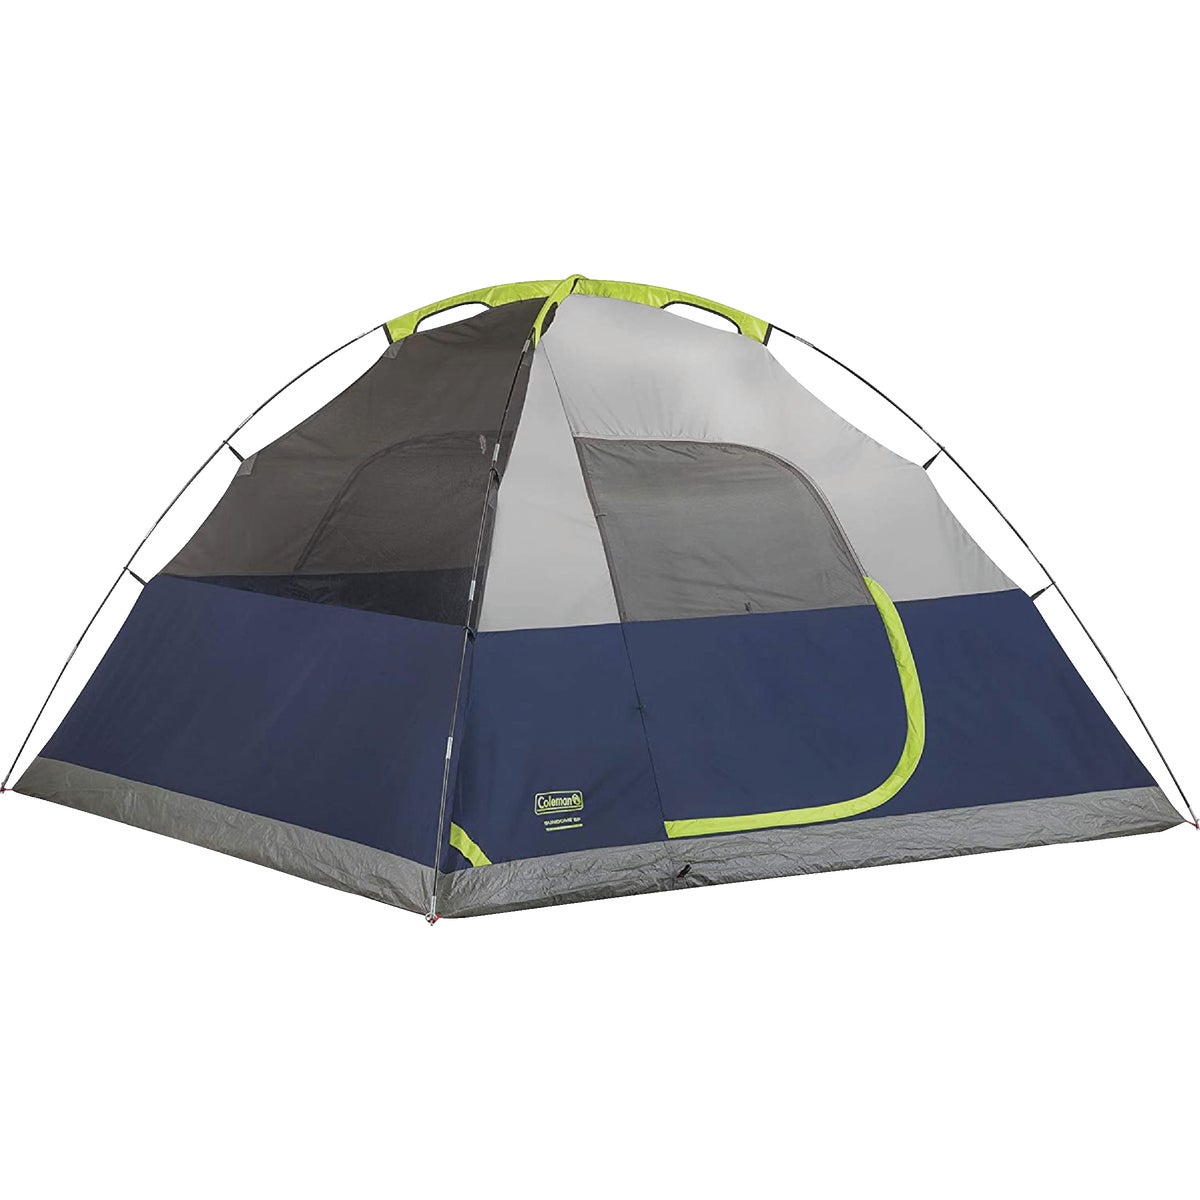 Item 824437, 2-person sundome camping tent with a spacious interior.